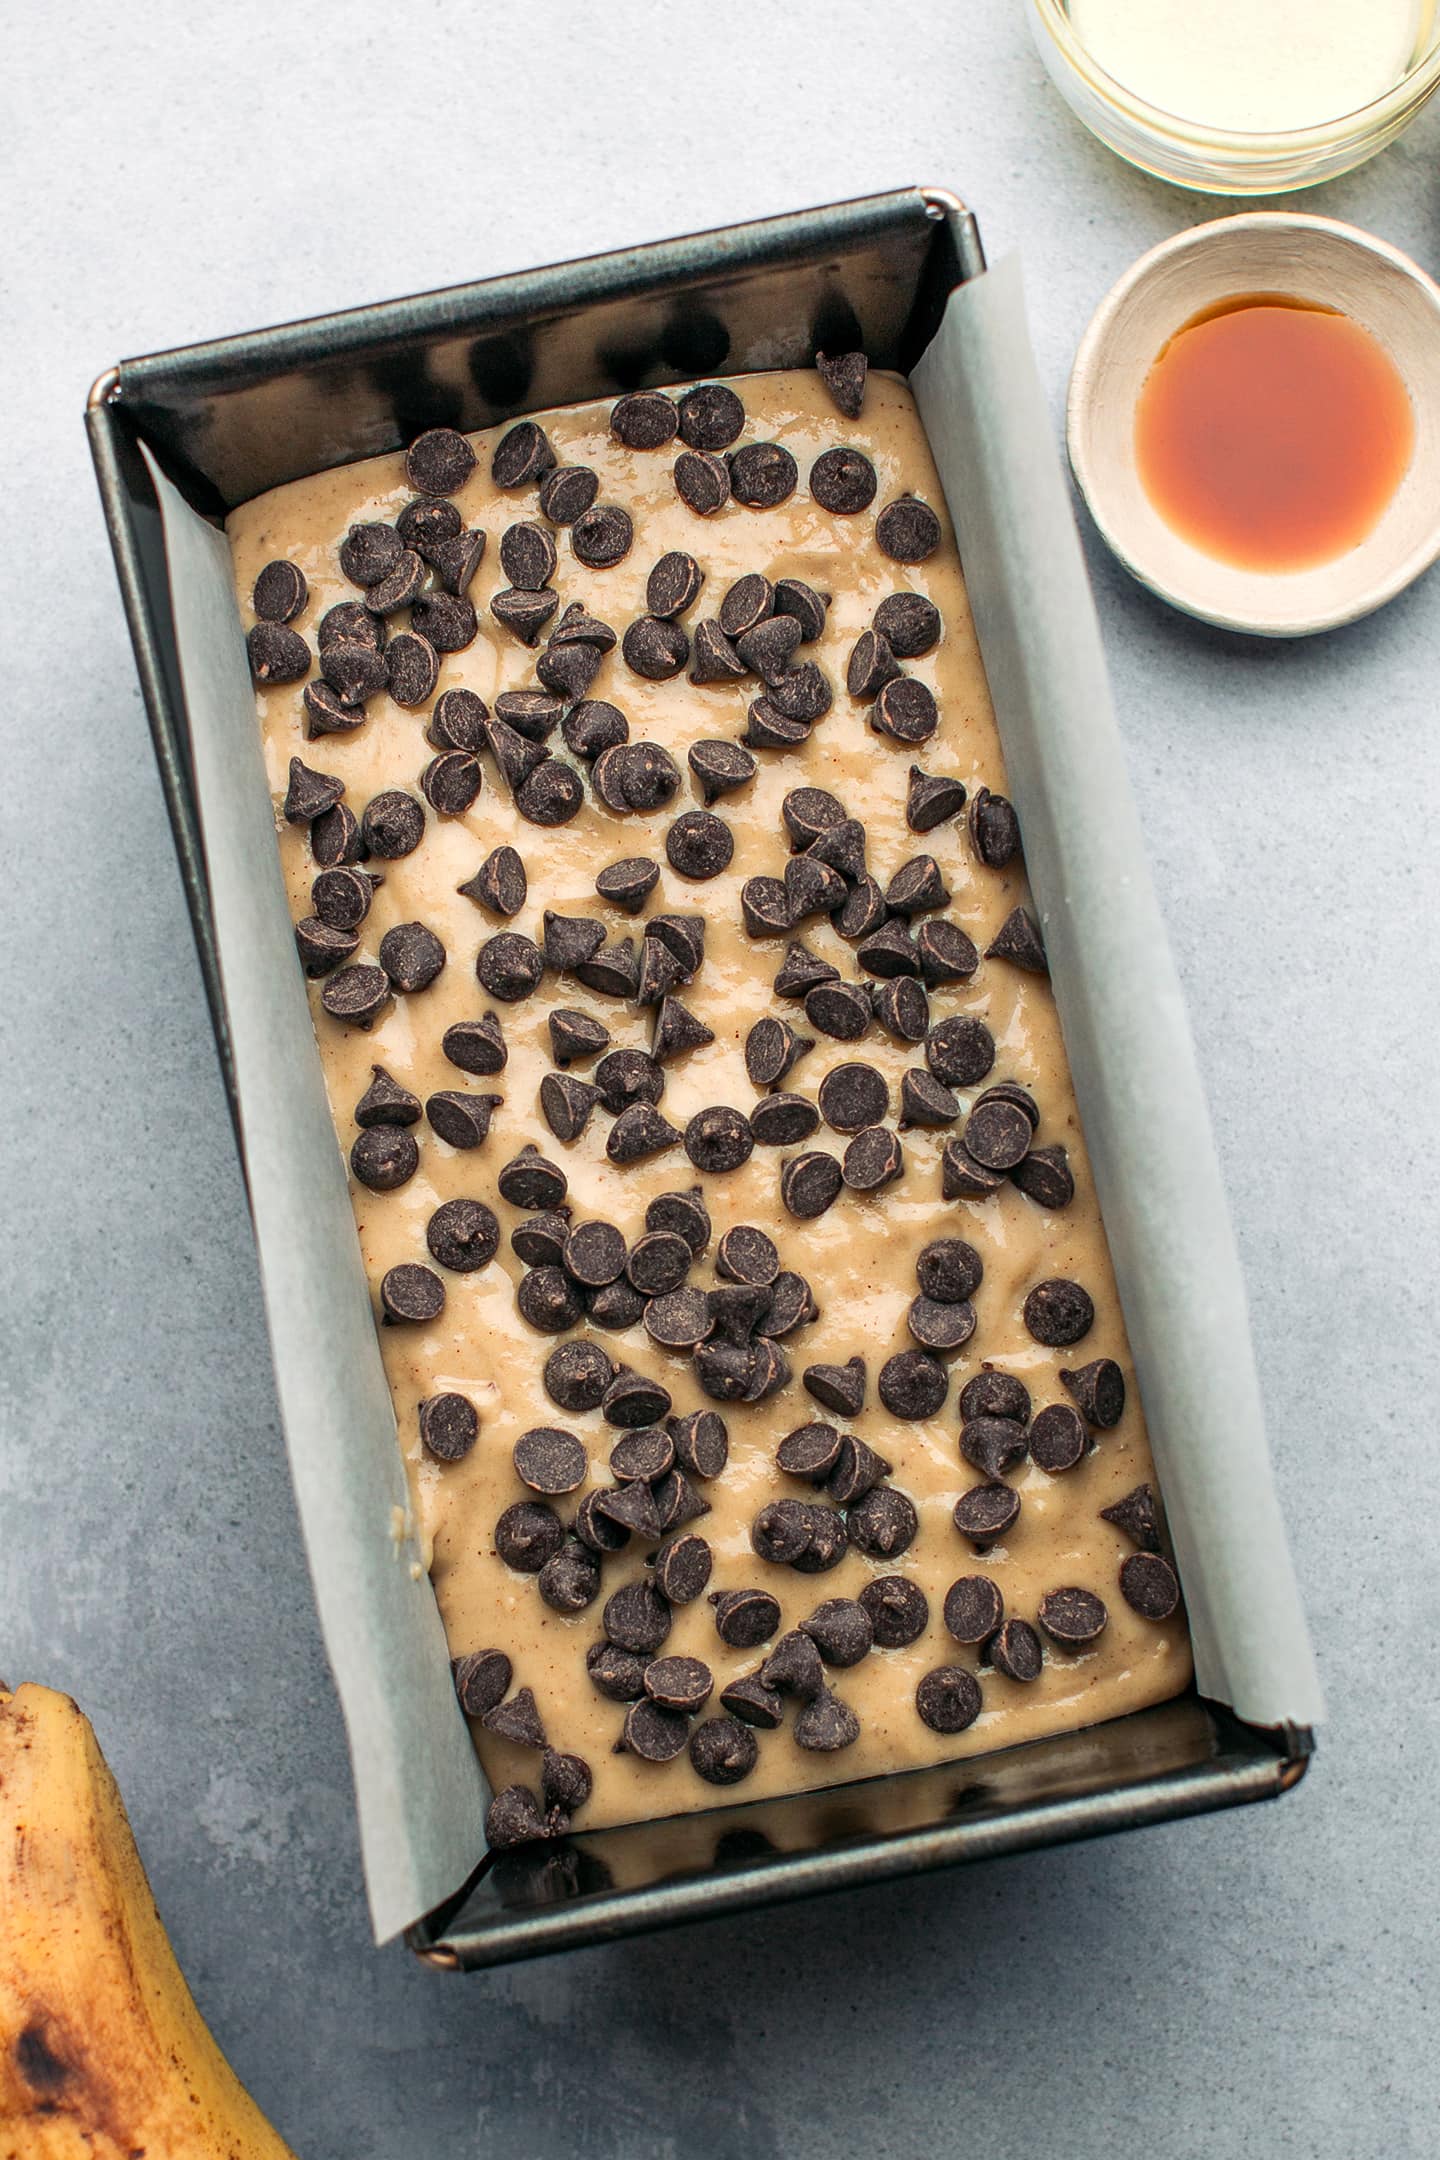 Banana bread batter topped with chocolate chips in a loaf pan.